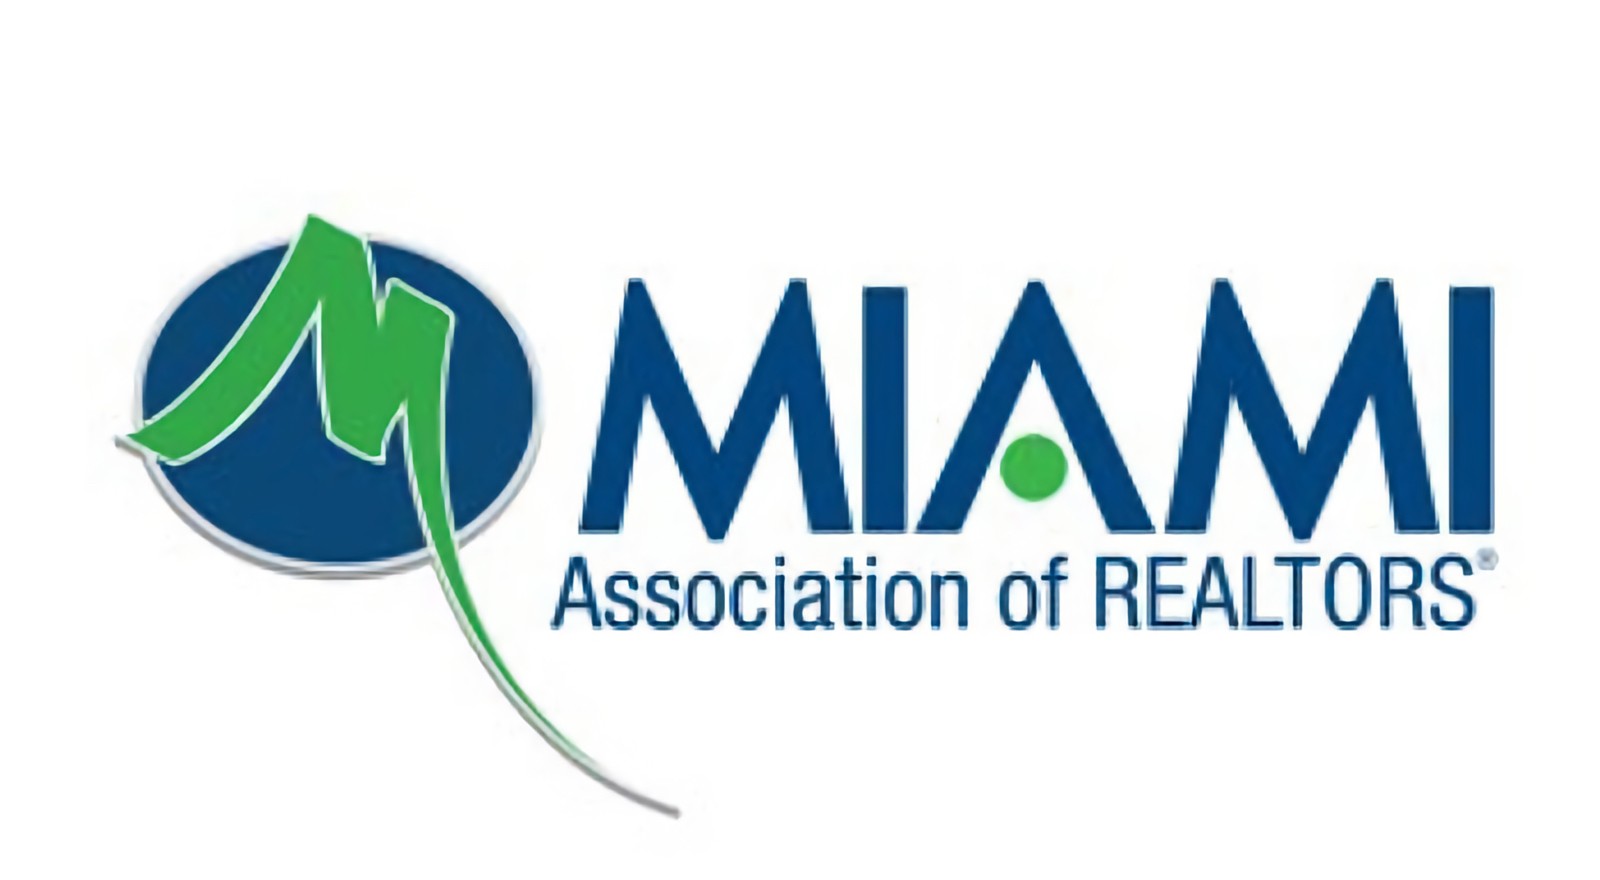 LikeRE.com and Miami Realtors Partner to Empower Members with Industry-Leading Professional Development